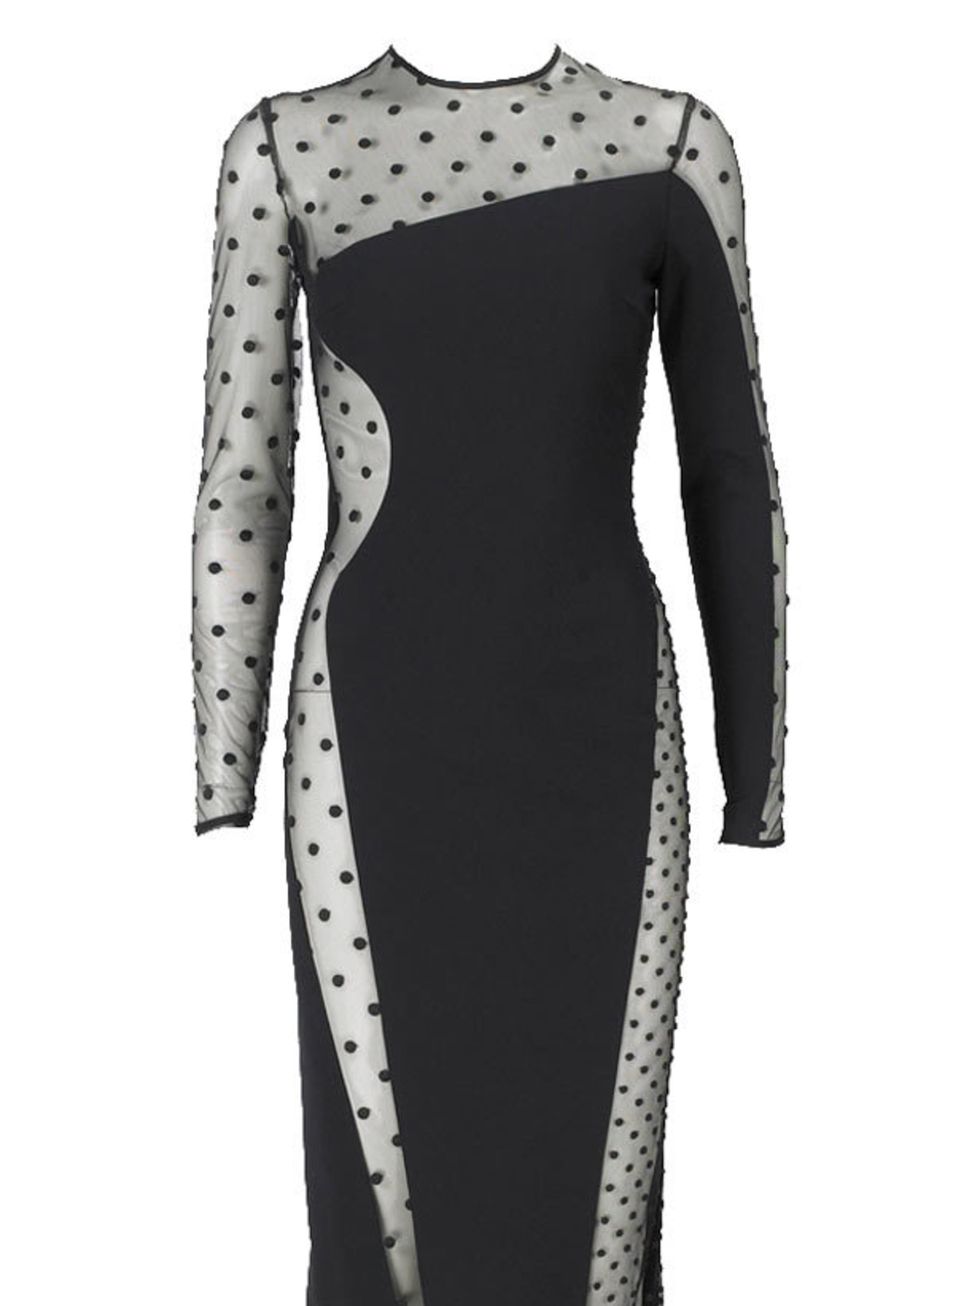 <p>Stella McCartney spotted dress, £1,525, for stockists call 0207 518 3100</p>